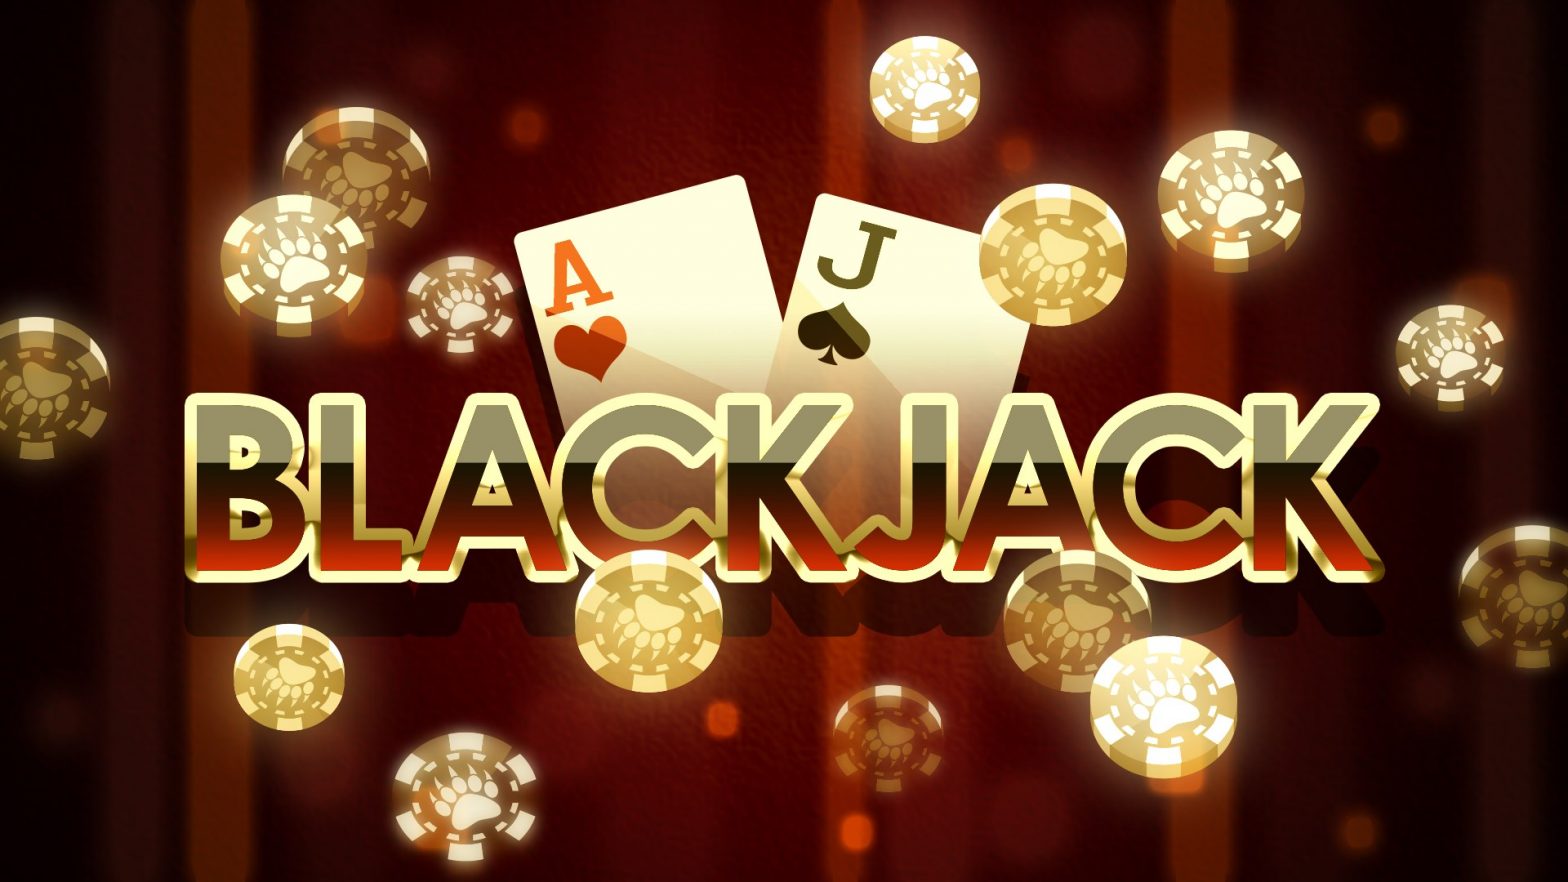 Blackjack is all about having fun and winning more. Discover the best strategies!